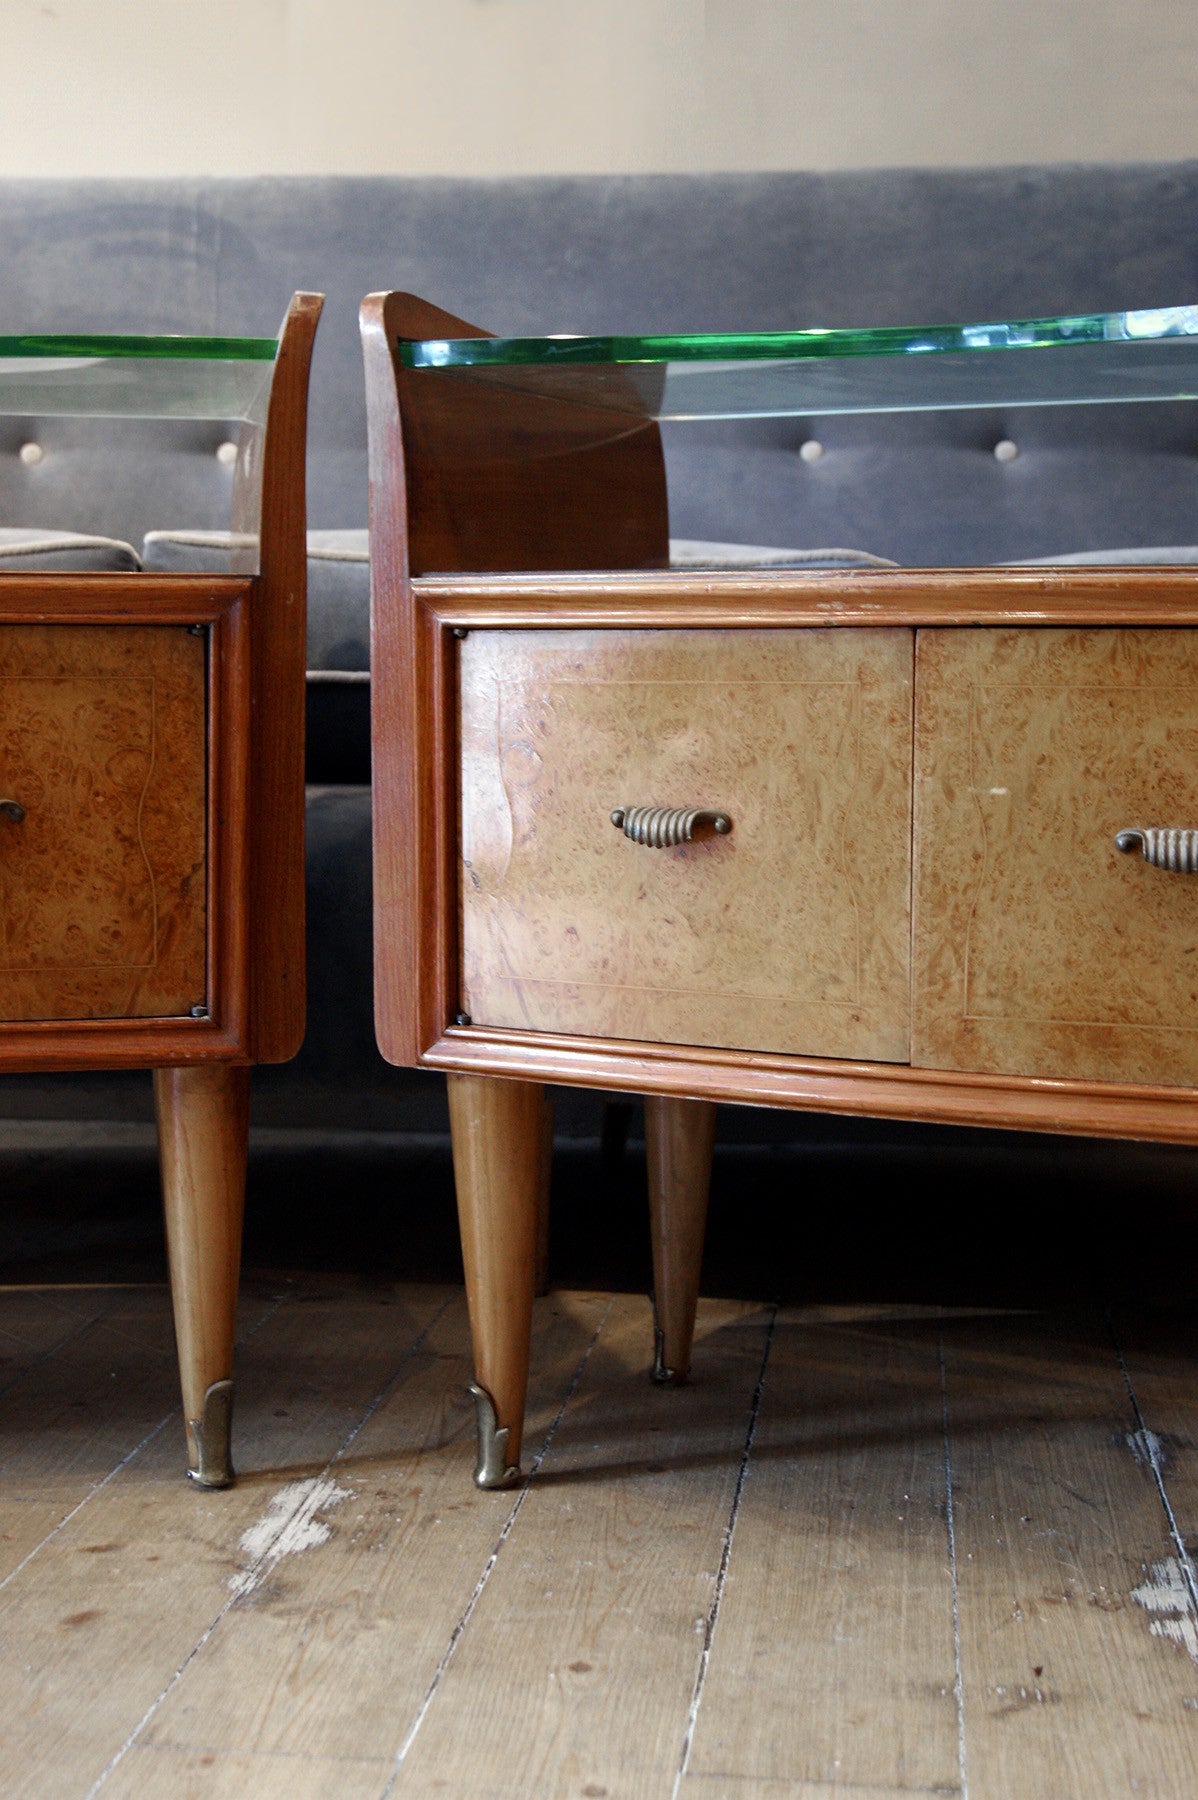 X Pair of Italian 1950s bedside cabinets with plate glass tops.